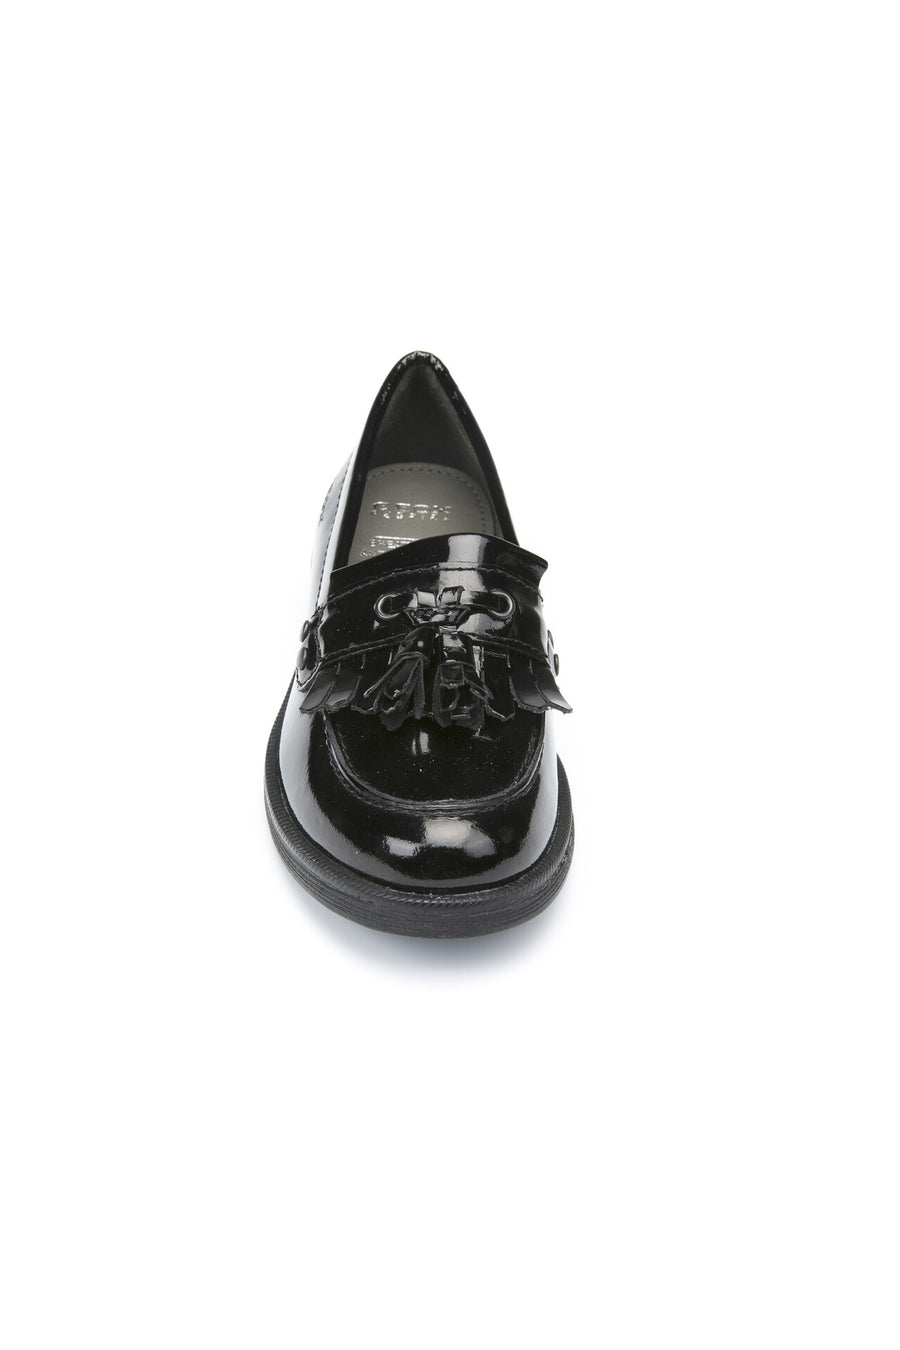 Geox Loafer|Agata A|Black Patent